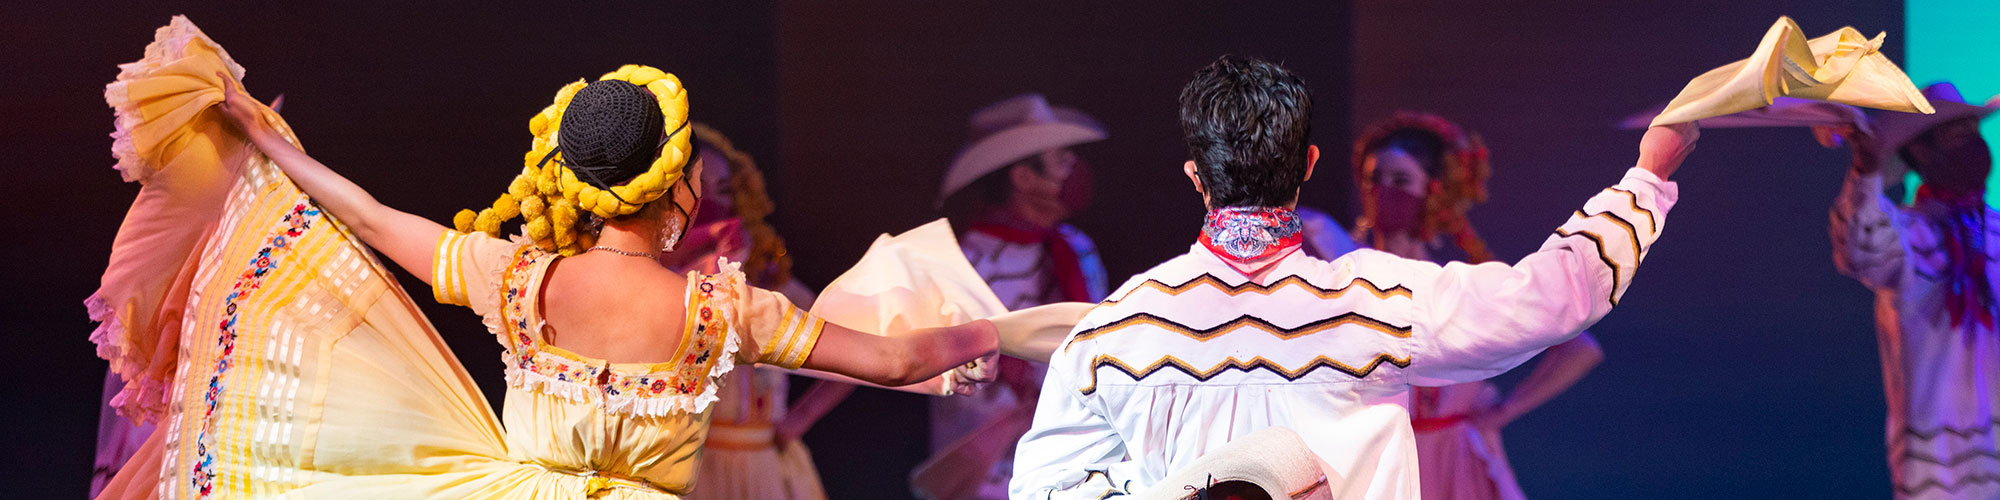 Traditional Latino dancers, a woman with her skirt held high to the left and a man with his had held up to the right.